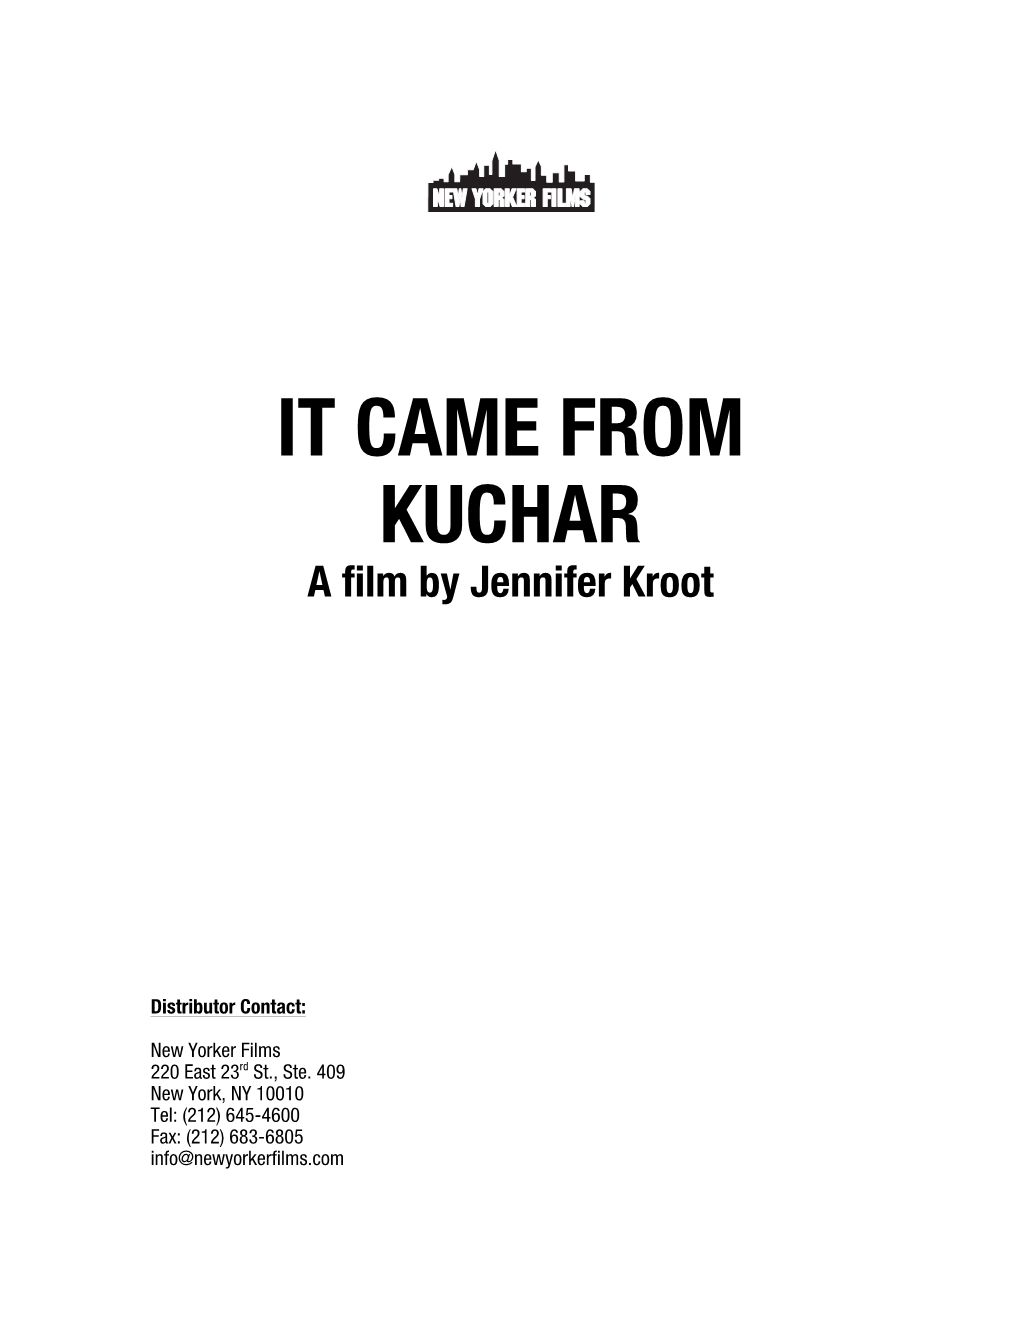 IT CAME from KUCHAR Is a Hilarious and Touching Story of Artistic Obsession, Compulsion and Inspiration